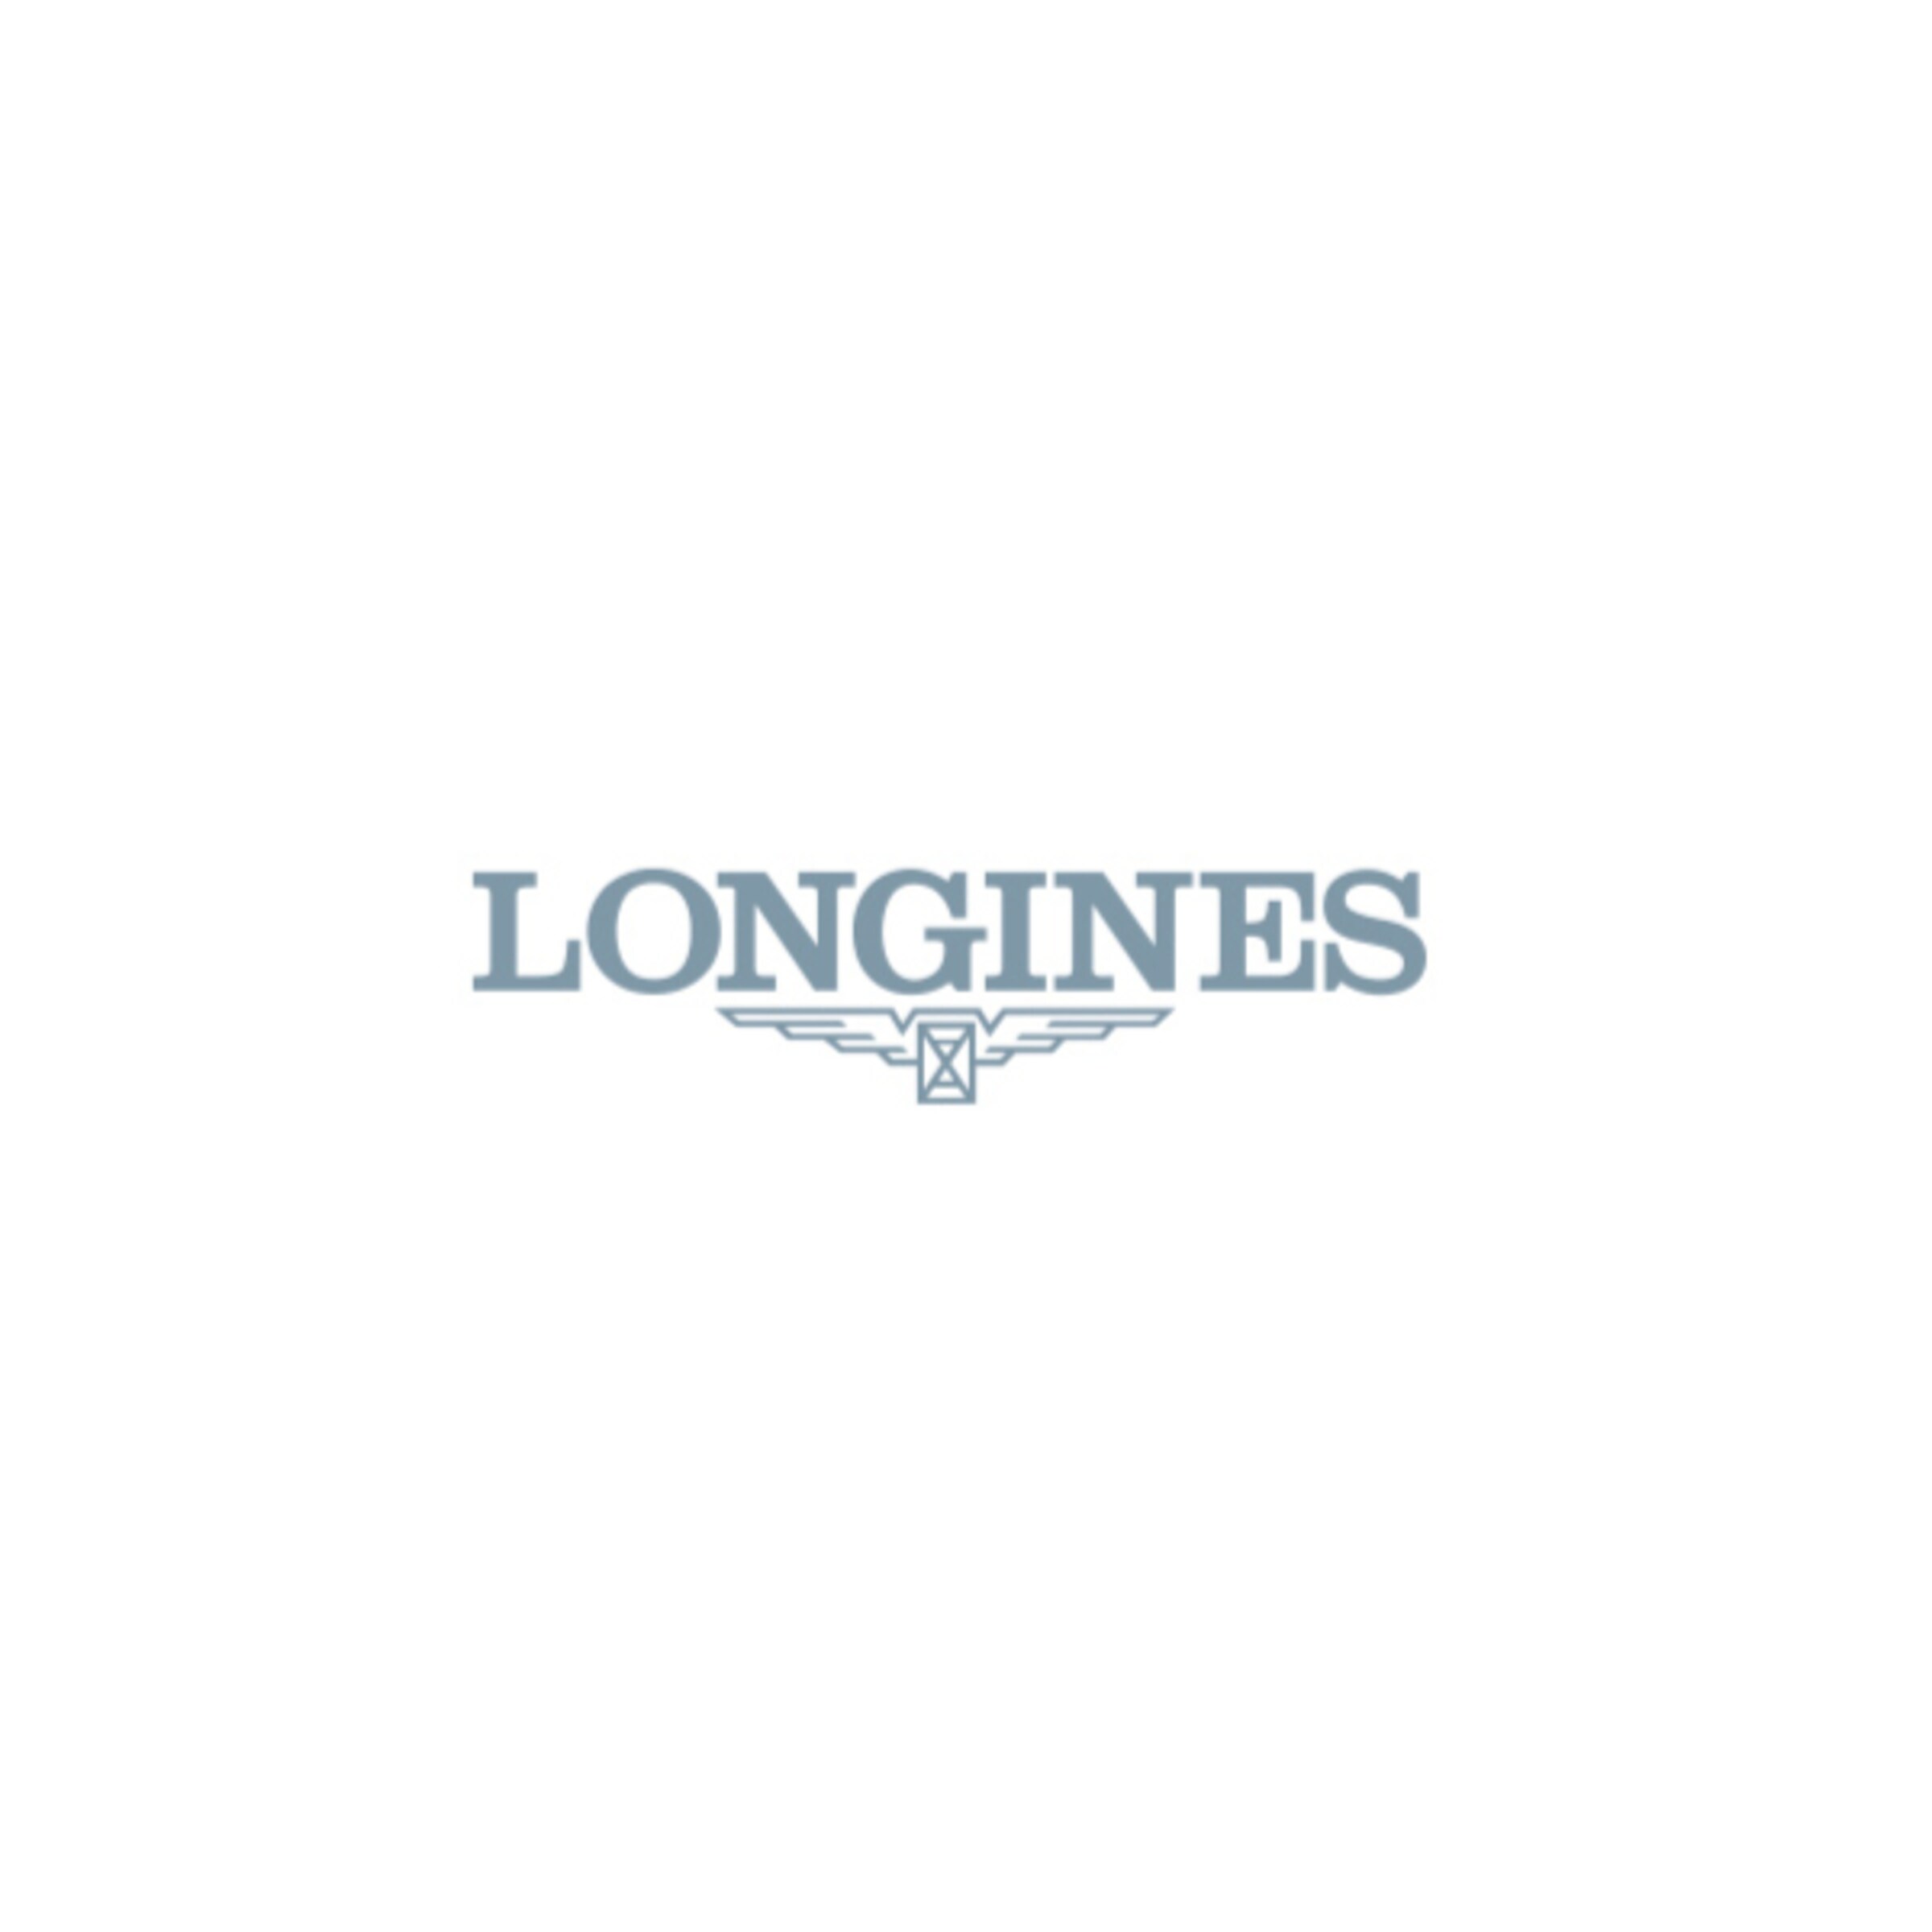 Longines THE LONGINES MASTER COLLECTION Automatic 18 karat pink gold Watch - L2.793.8.73.2